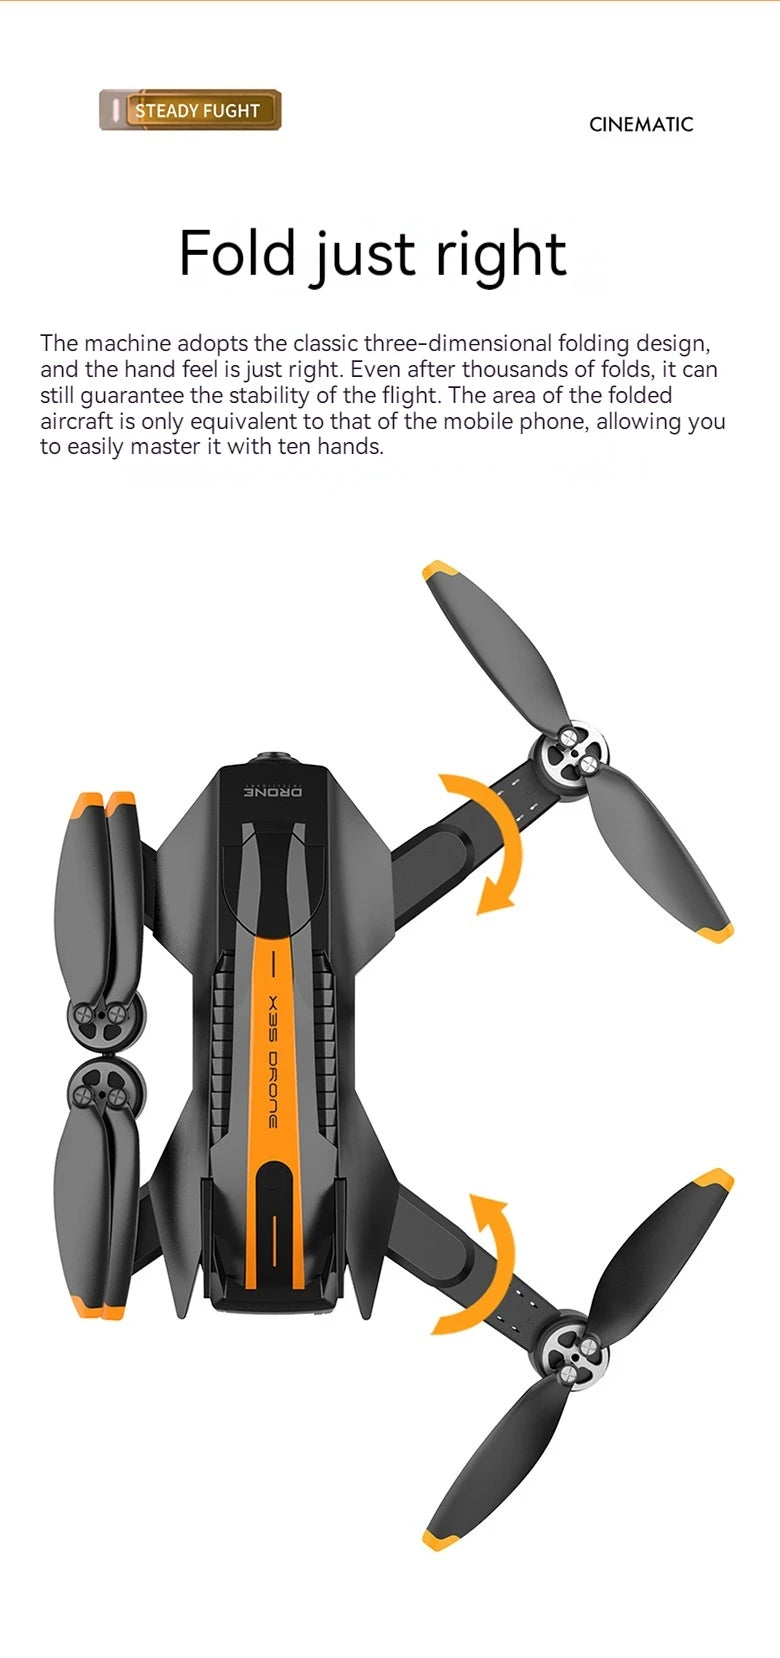 Water Bomb Drone, the folding machine adopts the classic three-dimensional folding design .